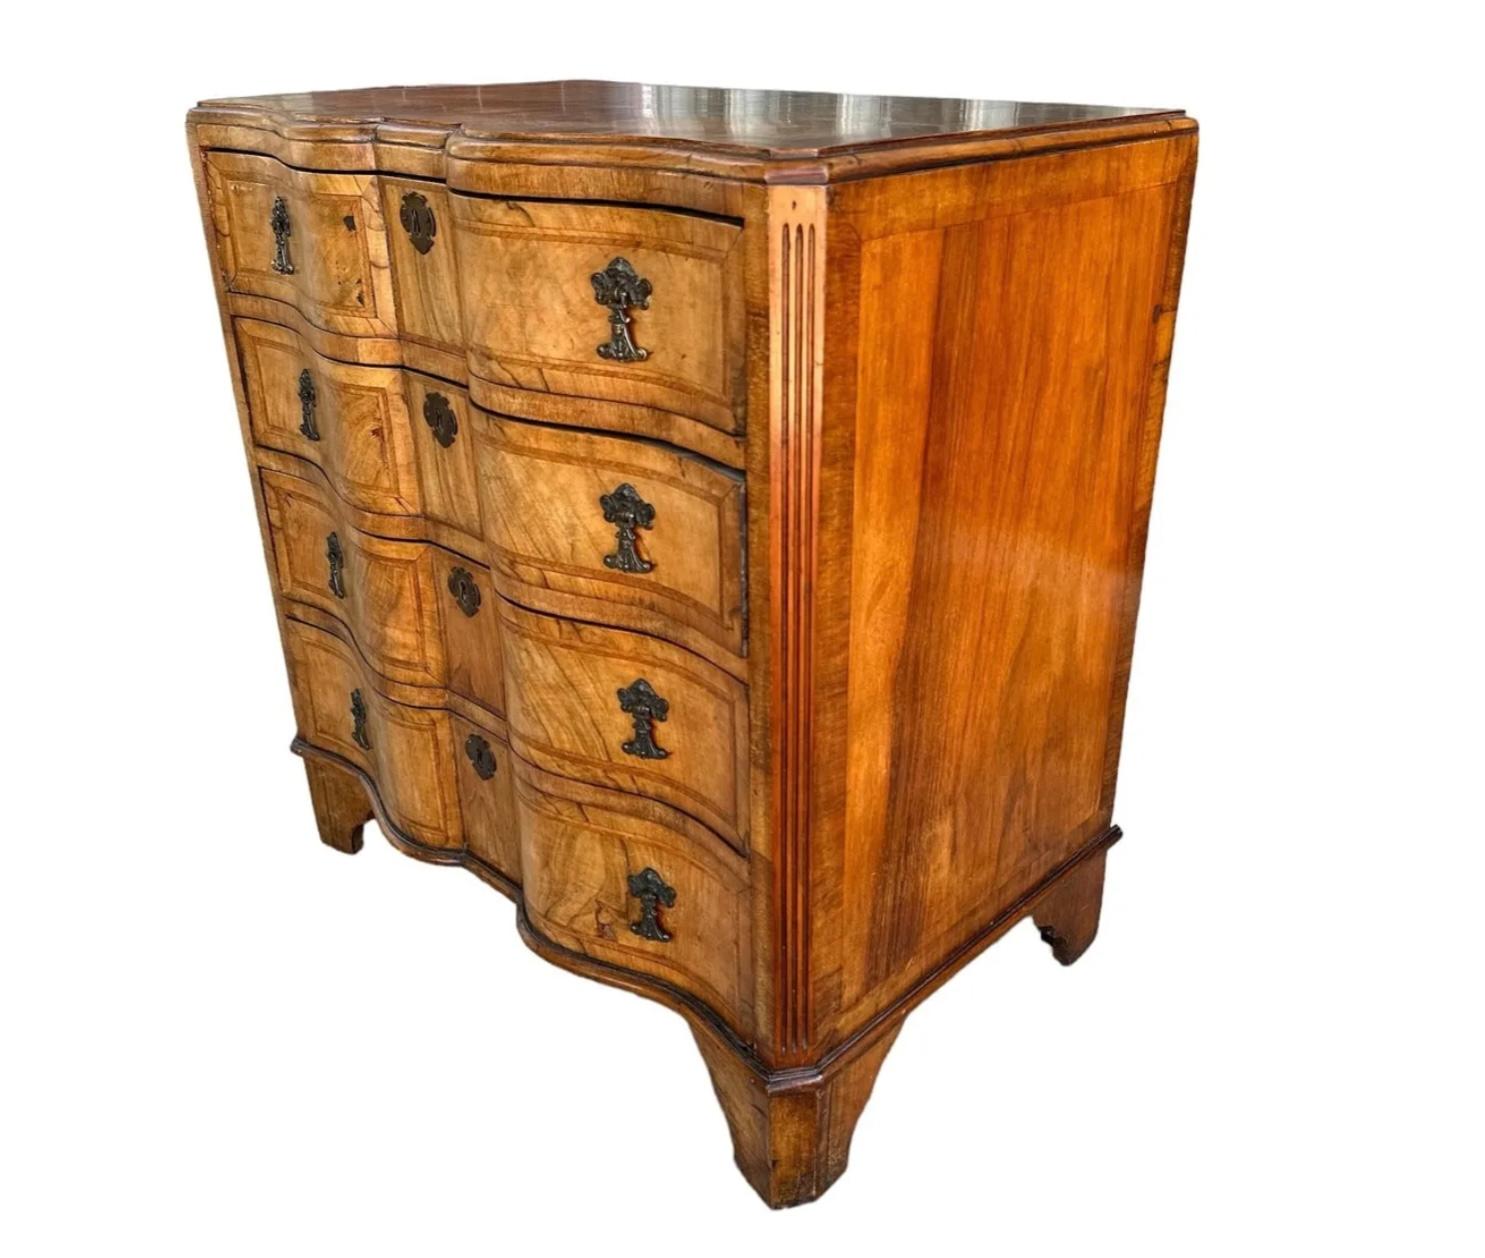 19th Century Italian early banded walnut inlay serpentine front chest. Chest has four drawers, each with original brass hardware supported by bracket feet. Wonderful old mellow patina to the walnut.